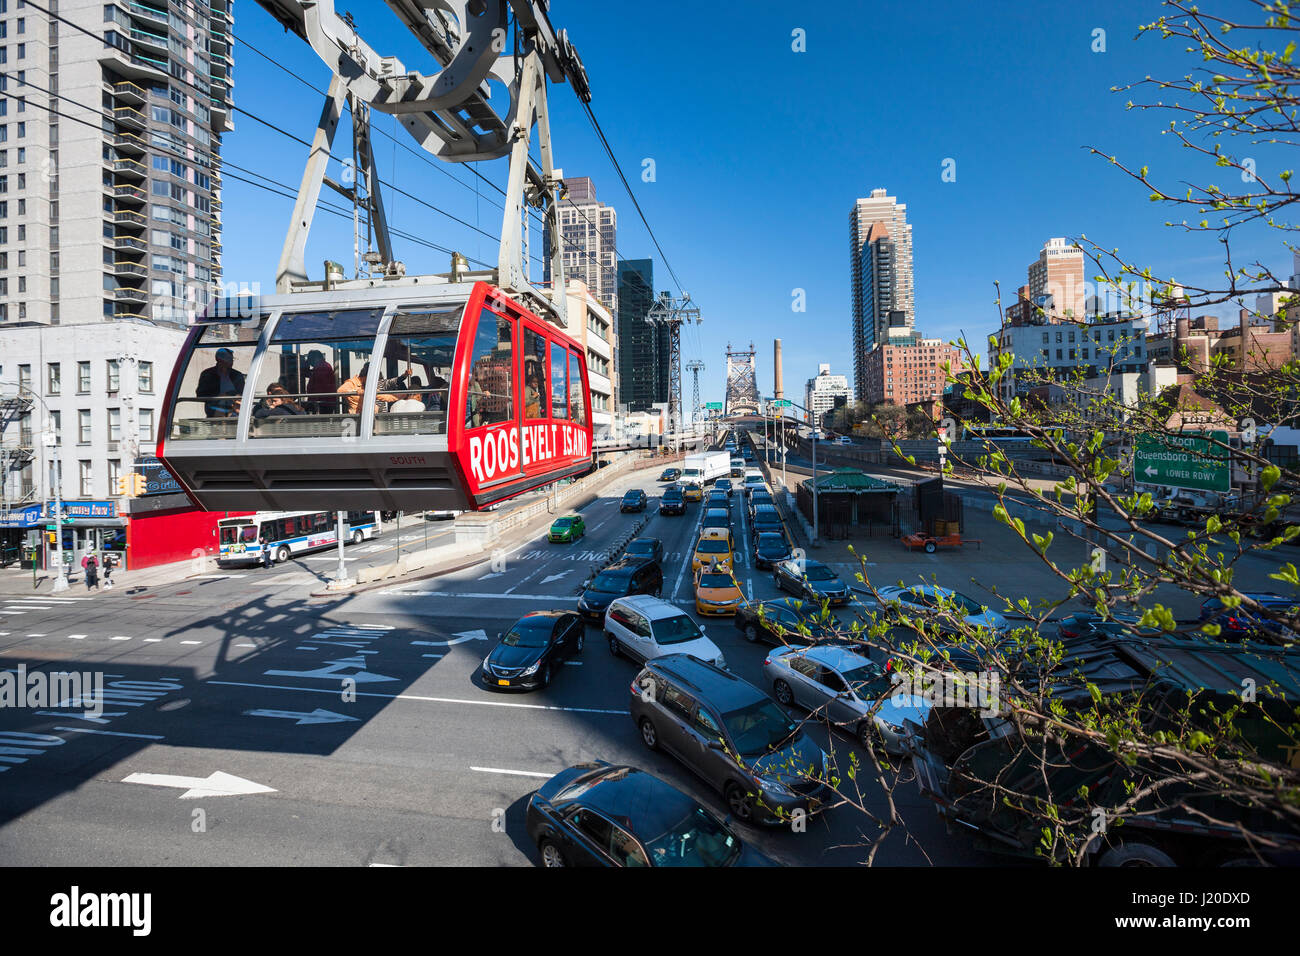 Roosevelt Island tramvay in  E 59th St & 2nd Avenue.Aerial tramway in New York City connects Roosevelt Island to the Upper East Side of Manhattan. Stock Photo